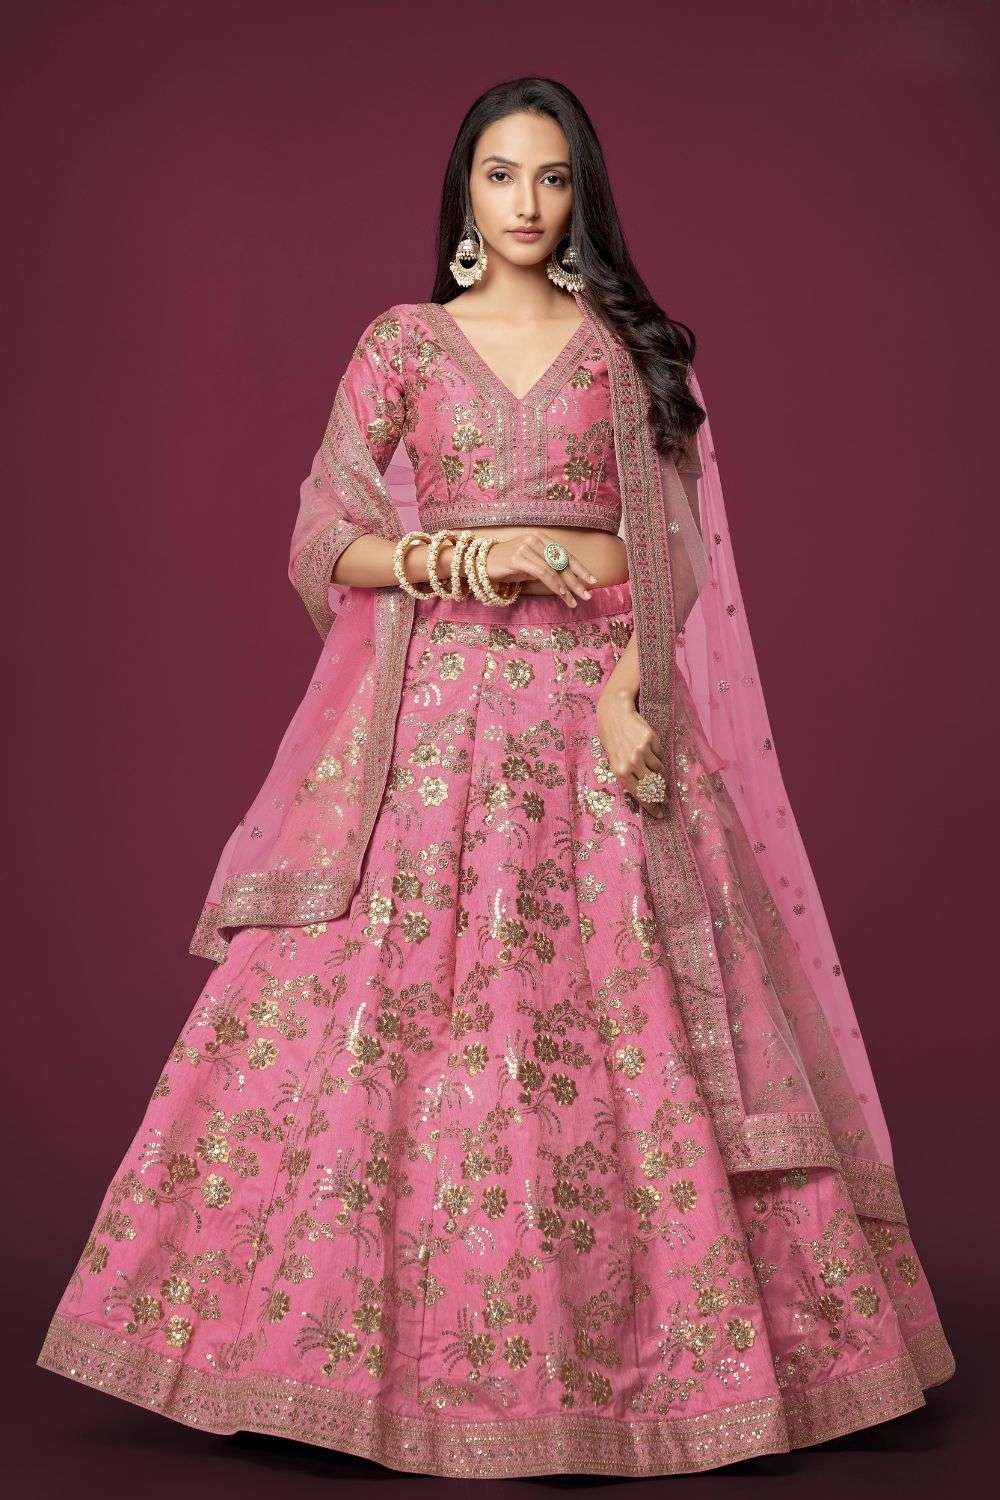 Photo of Light pink lehenga with silver work and mint dupatta | Indian  wedding outfits, Designer bridal lehenga choli, Indian bridal lehenga